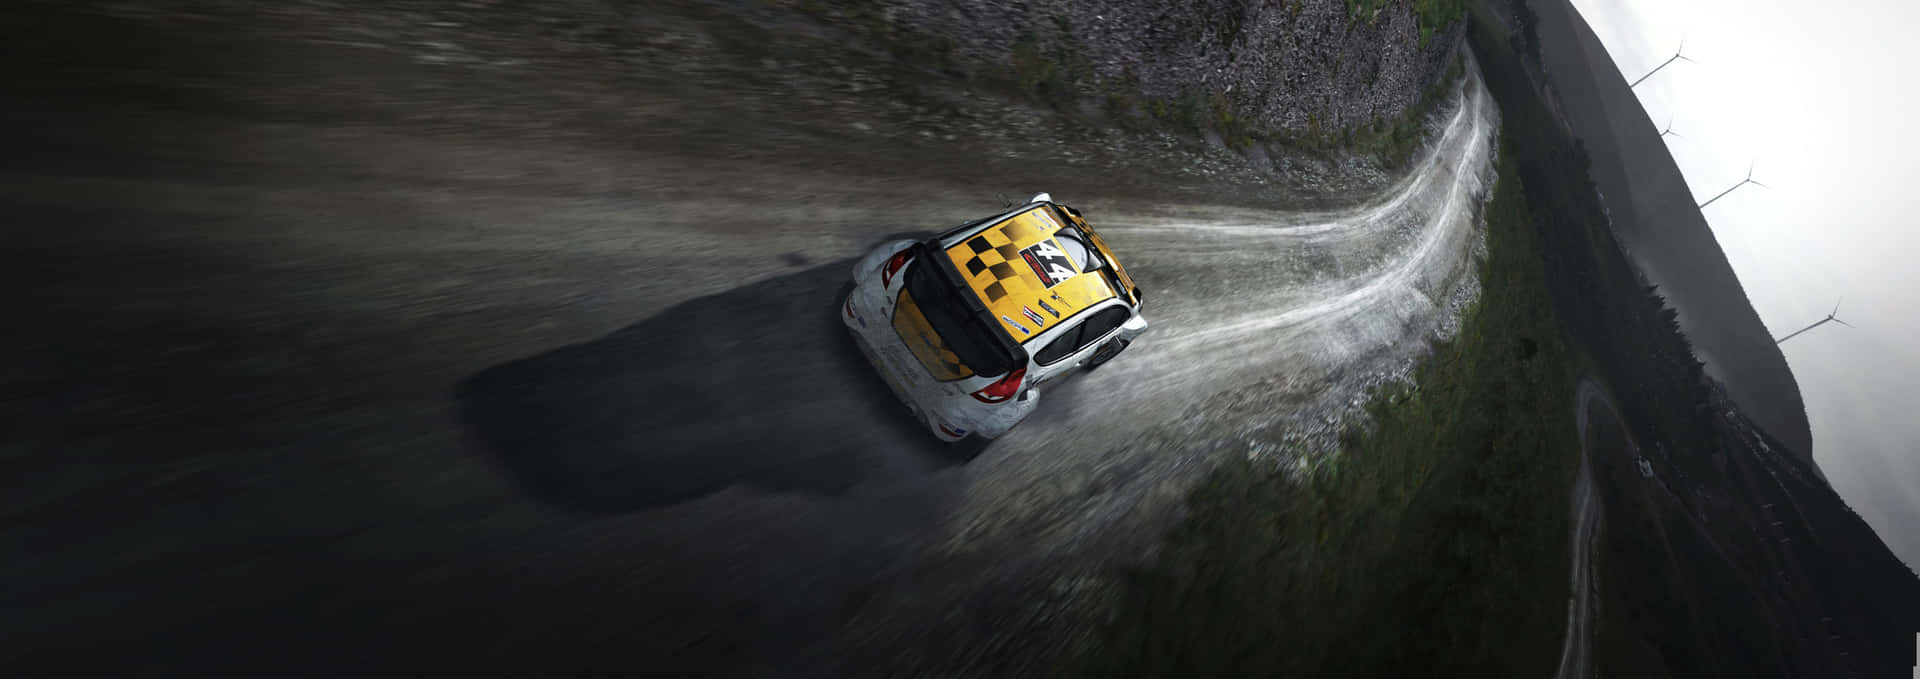 Exciting Off-road Adventure with the Dirt Game. Wallpaper